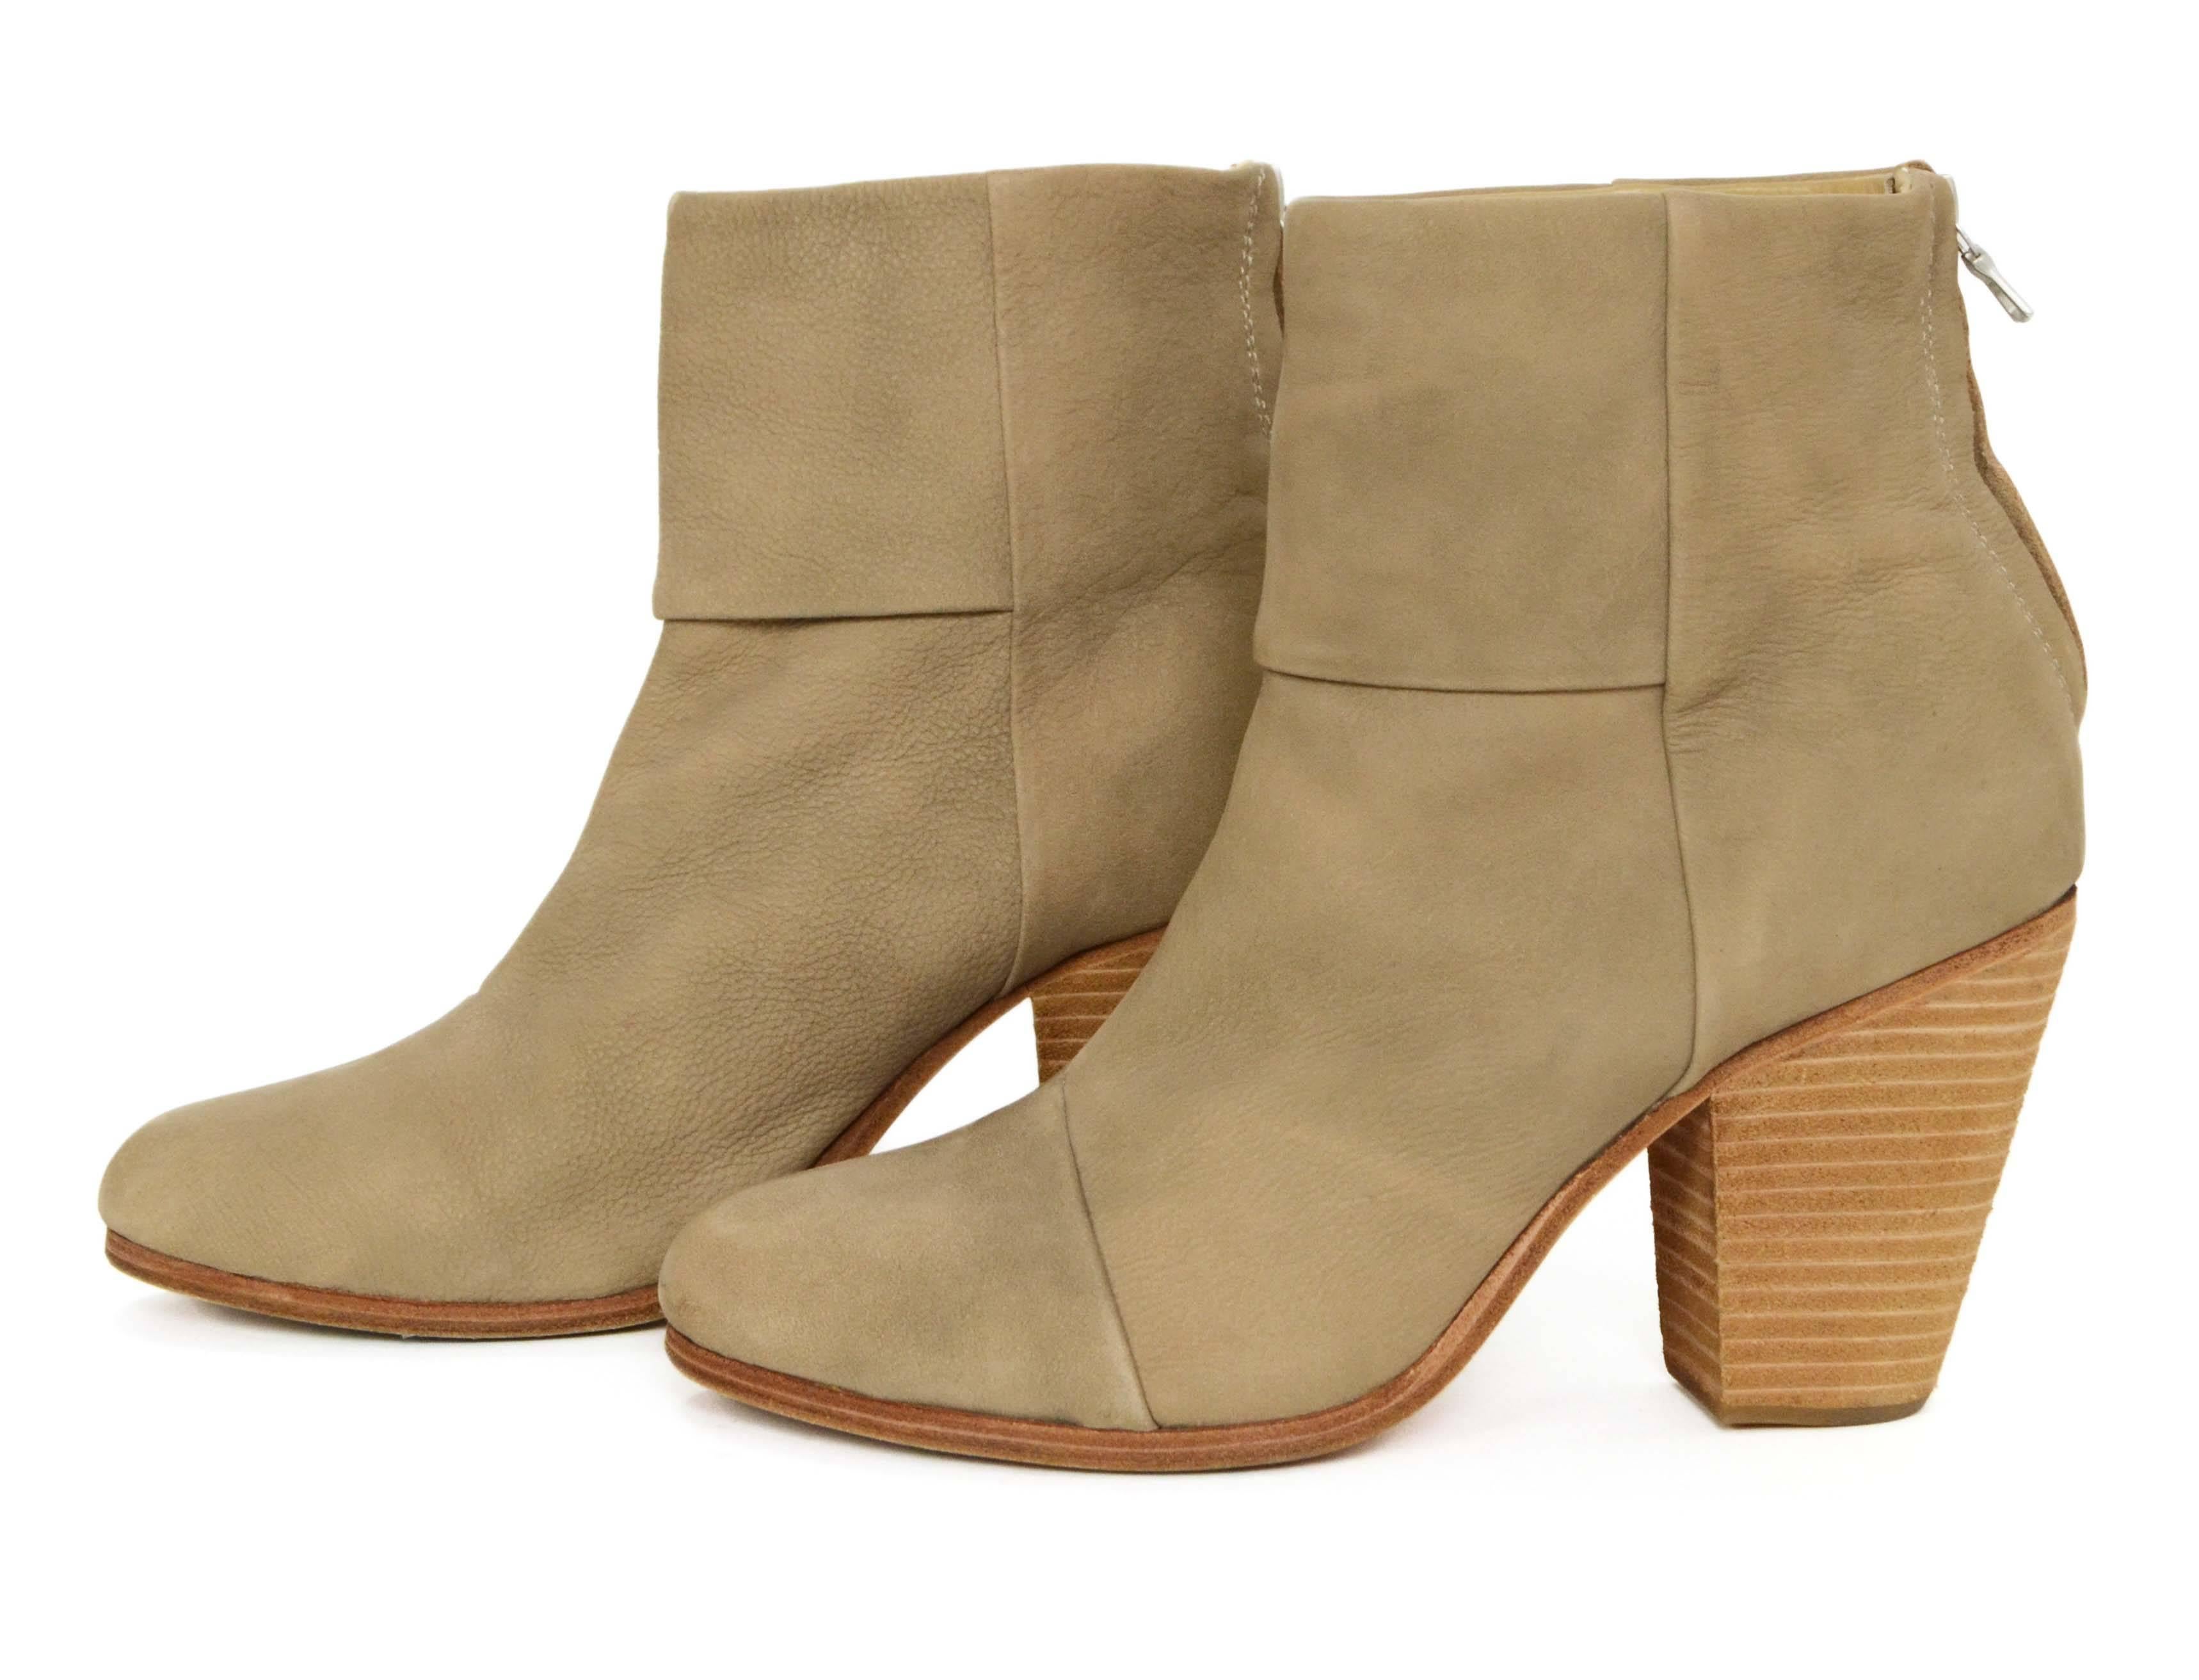 Rag & Bone Beige Leather Ankle Boots 
Features stacked wooden heel
Made In: China
Color: Beige
Composition: Leather
Closure/Opening: Back ankle zipper
Sole Stamp: Rag & Bone New York 39
Overall Condition: Excellent pre-owned condition with